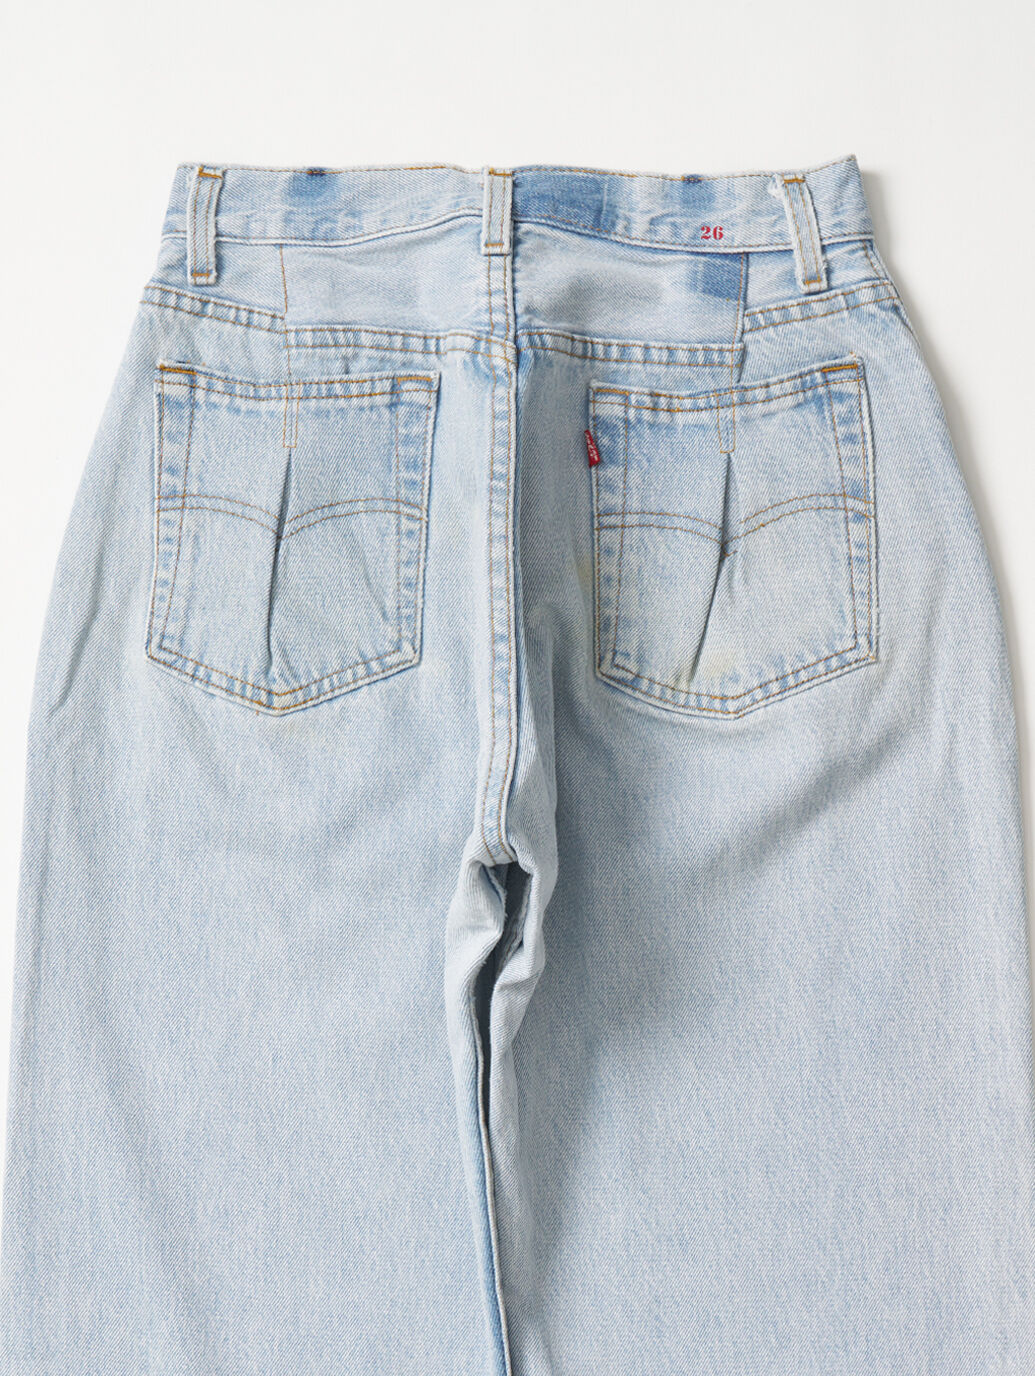 LEVI'S® AUTHORIZED VINTAGE MADE IN THE USA PLEATED パンツ 